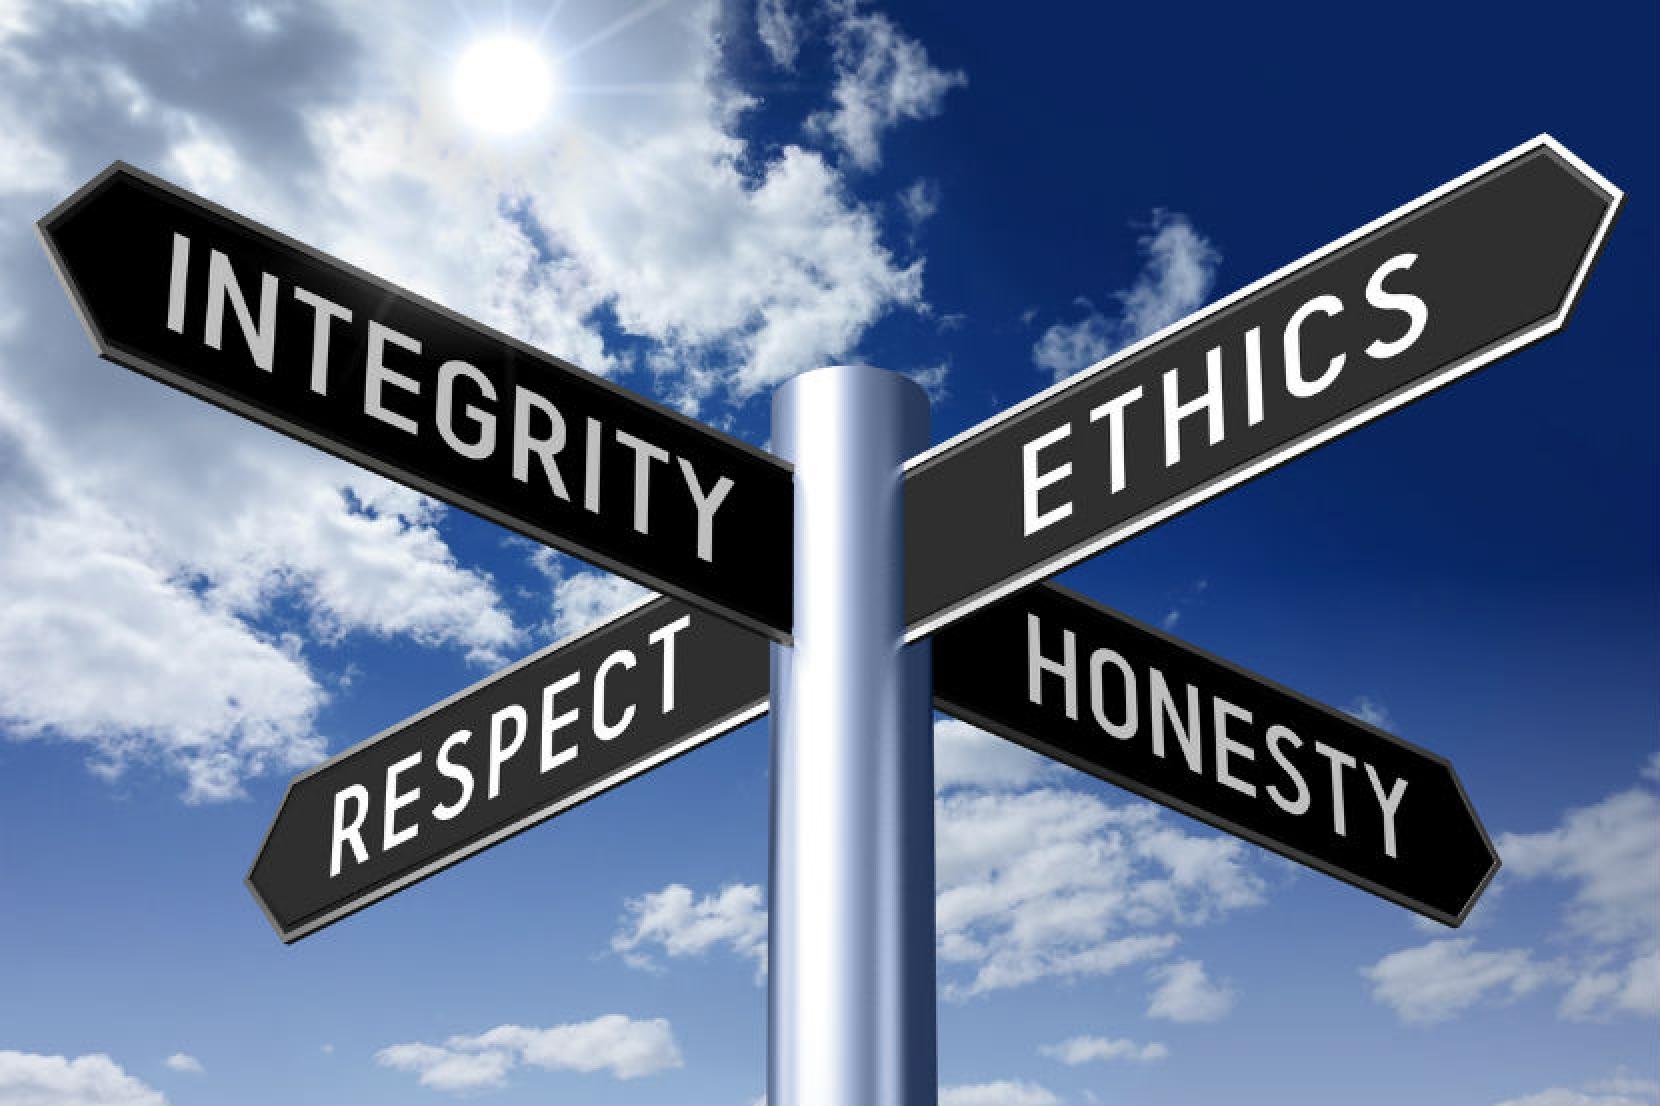  Four signs with the words 'Integrity', 'Ethics', 'Respect', and 'Honesty' on a metal post in front of a blue sky with clouds.